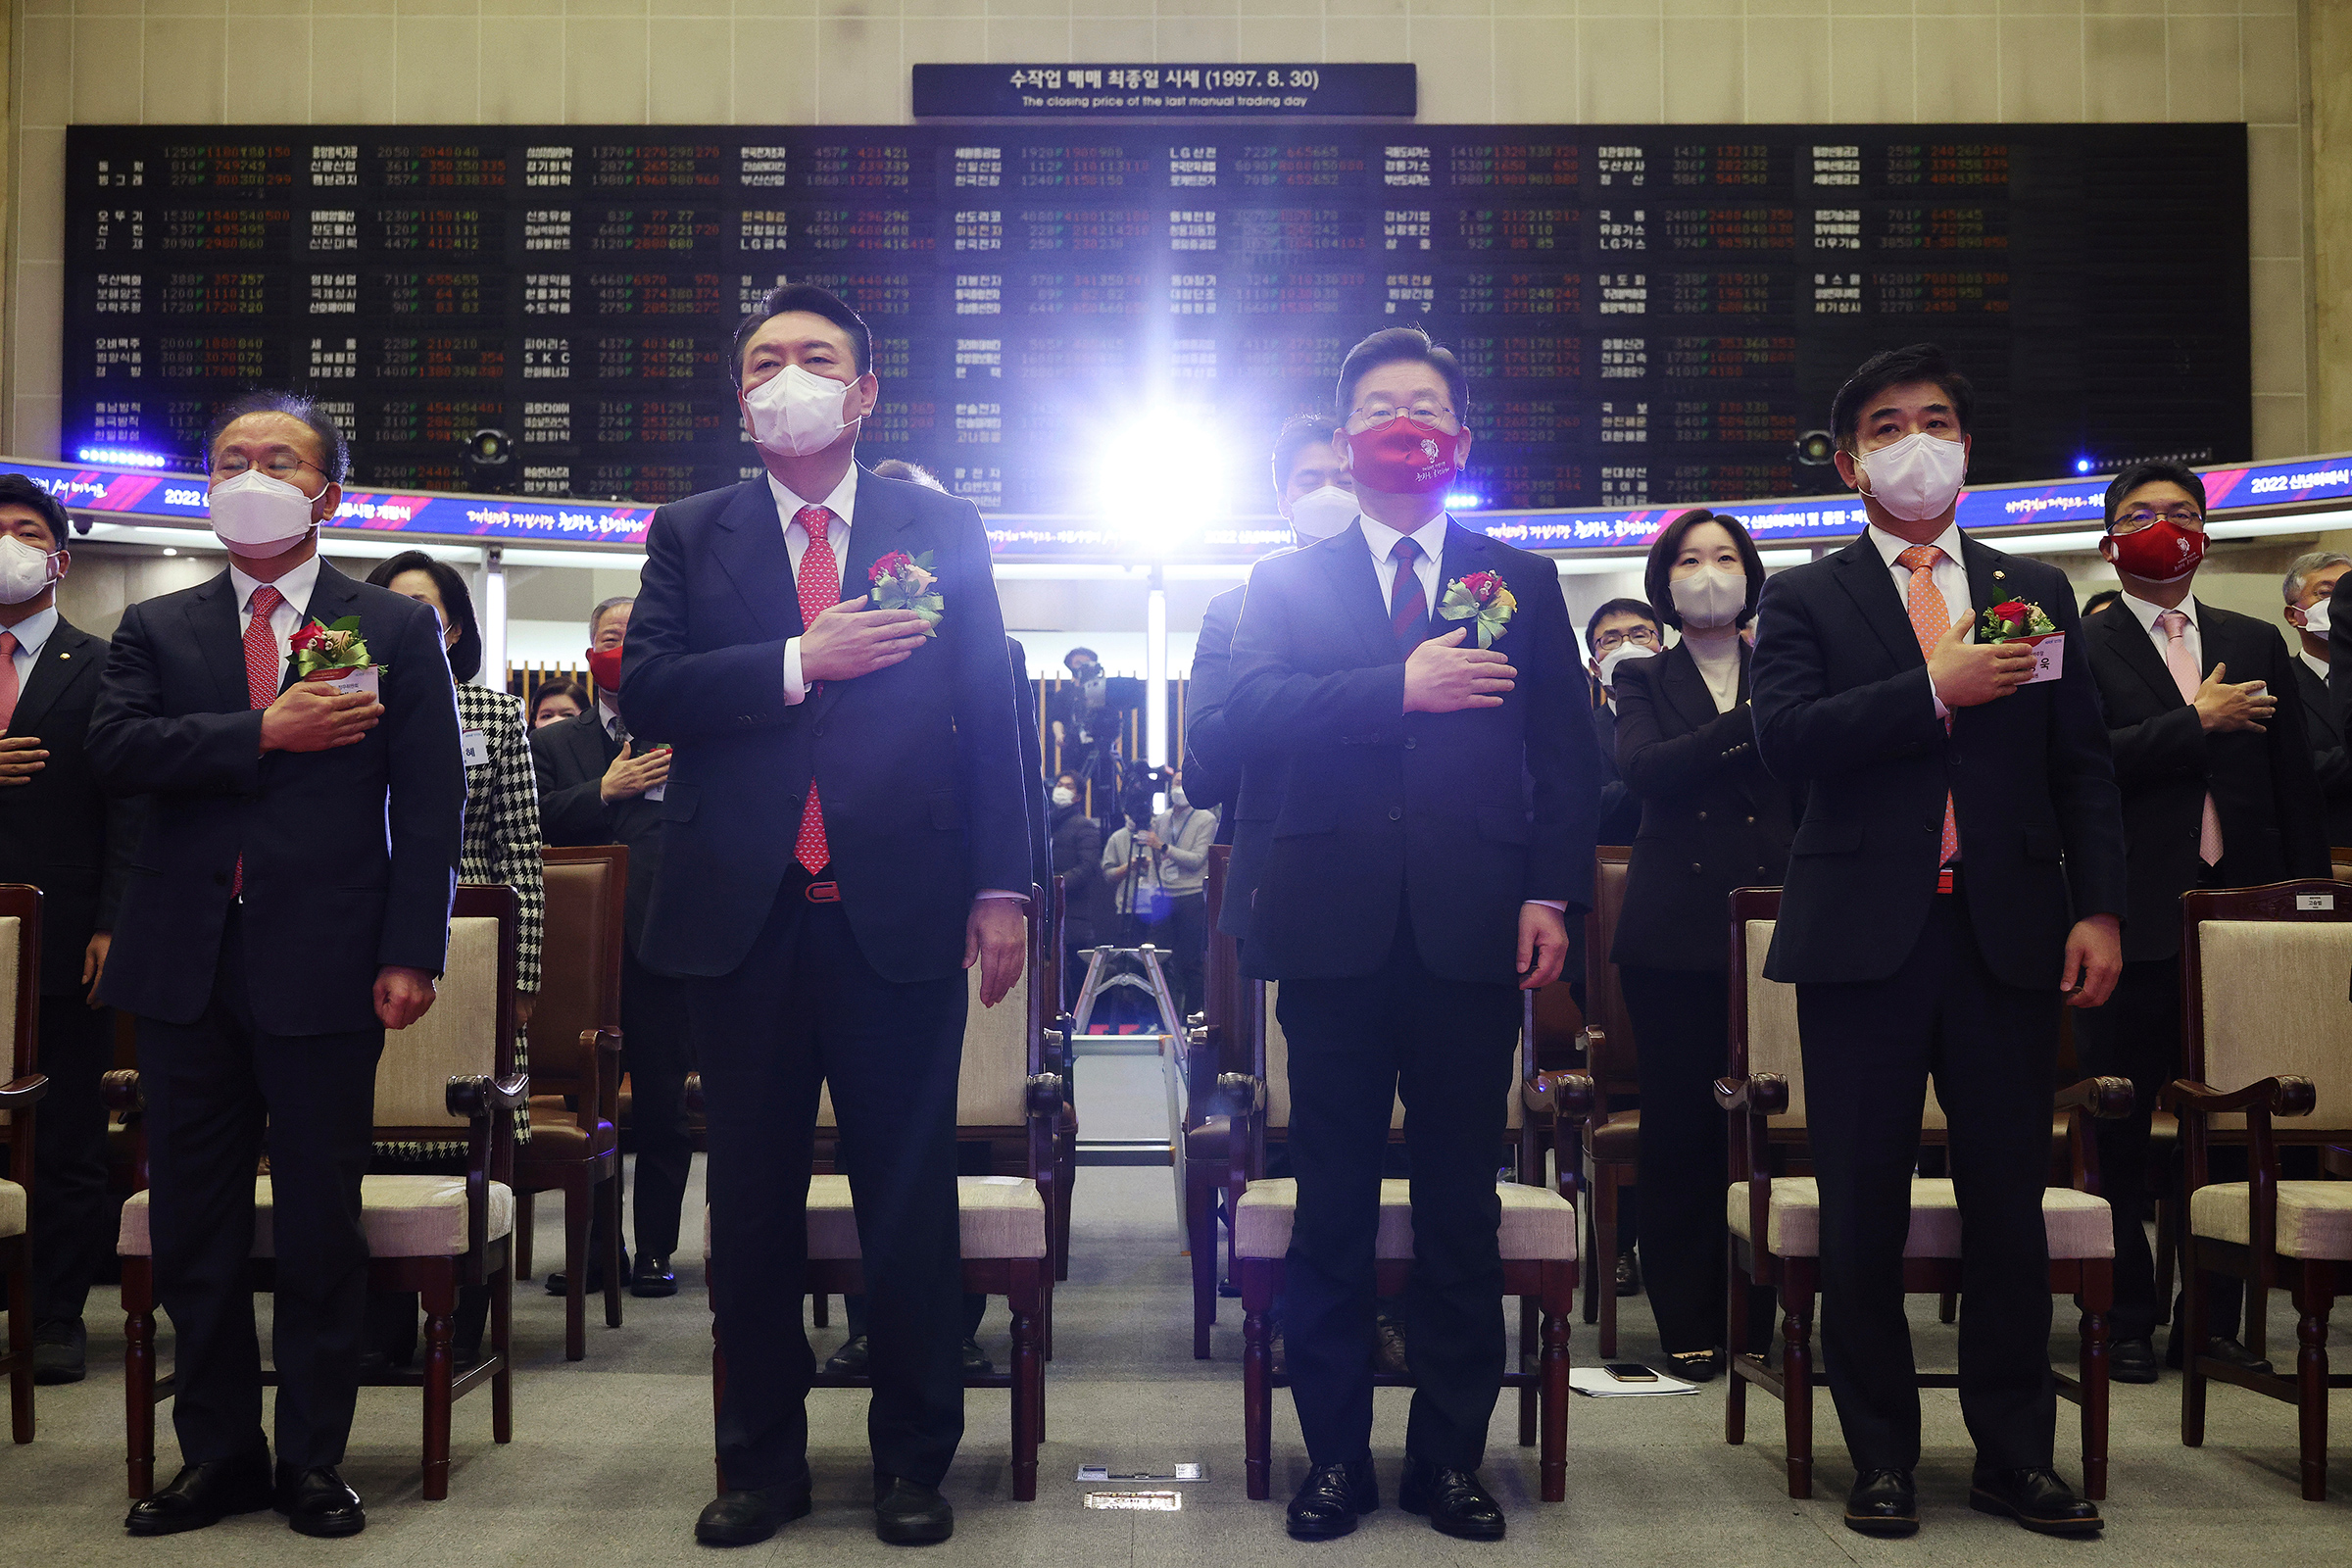 Yoon, center left, and Lee, center right, attend a ceremony for the first trading day of stock market at the Korea Exchange in Seoul on Jan. 3 (Kim Hong-ji—Pool/AP)